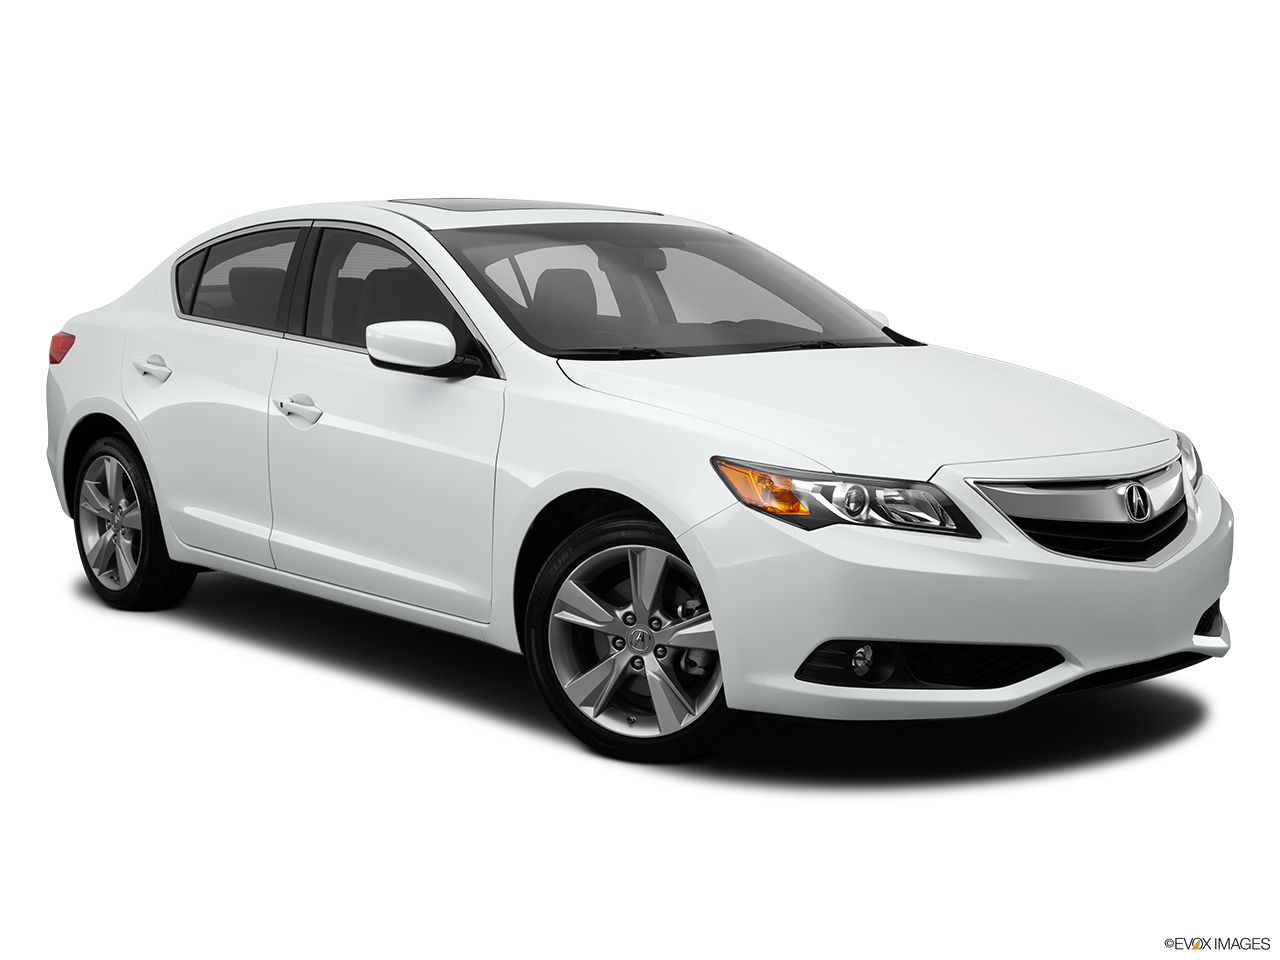 2015 Acura ILX 6-Speed Manual Front passenger 3/4 w/ wheels turned. 